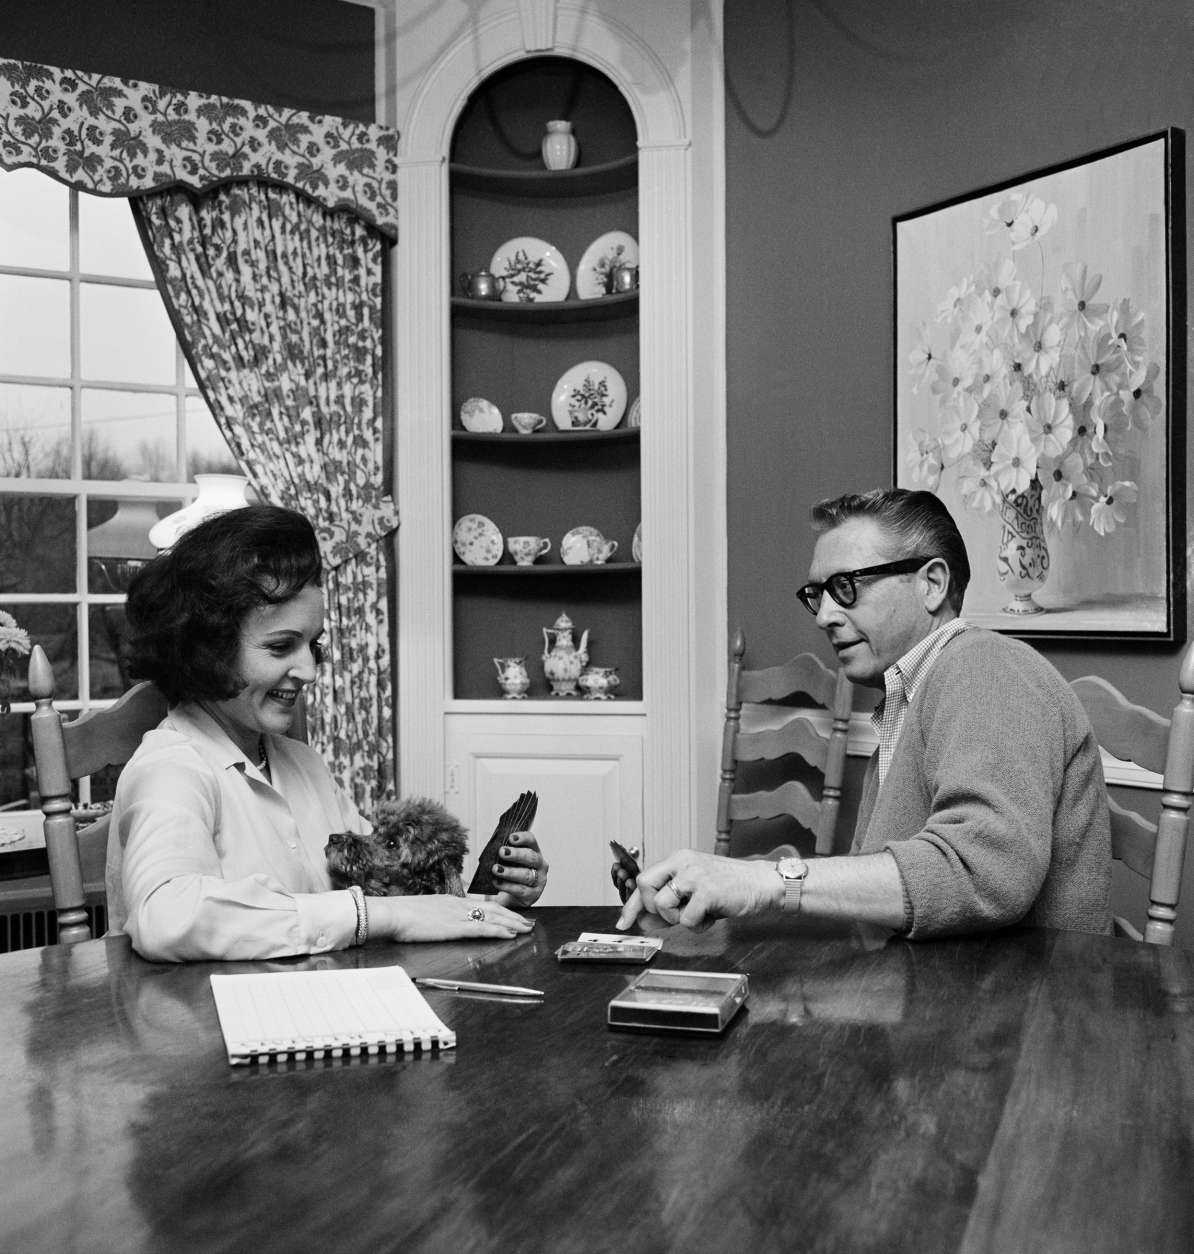 Allen Ludden and his wife Betty White, who love to play games, continue a two year gin rummy battle in which she's ahead by a cumulative 6,000 points in Westchester, N.Y. on April 29, 1965. They do it professionally on TV. He's the master of ceremonies on "Password,"  and she makes frequent guest appearances on game shows. They play games to relax at home. (AP Photo/Bob Wands)